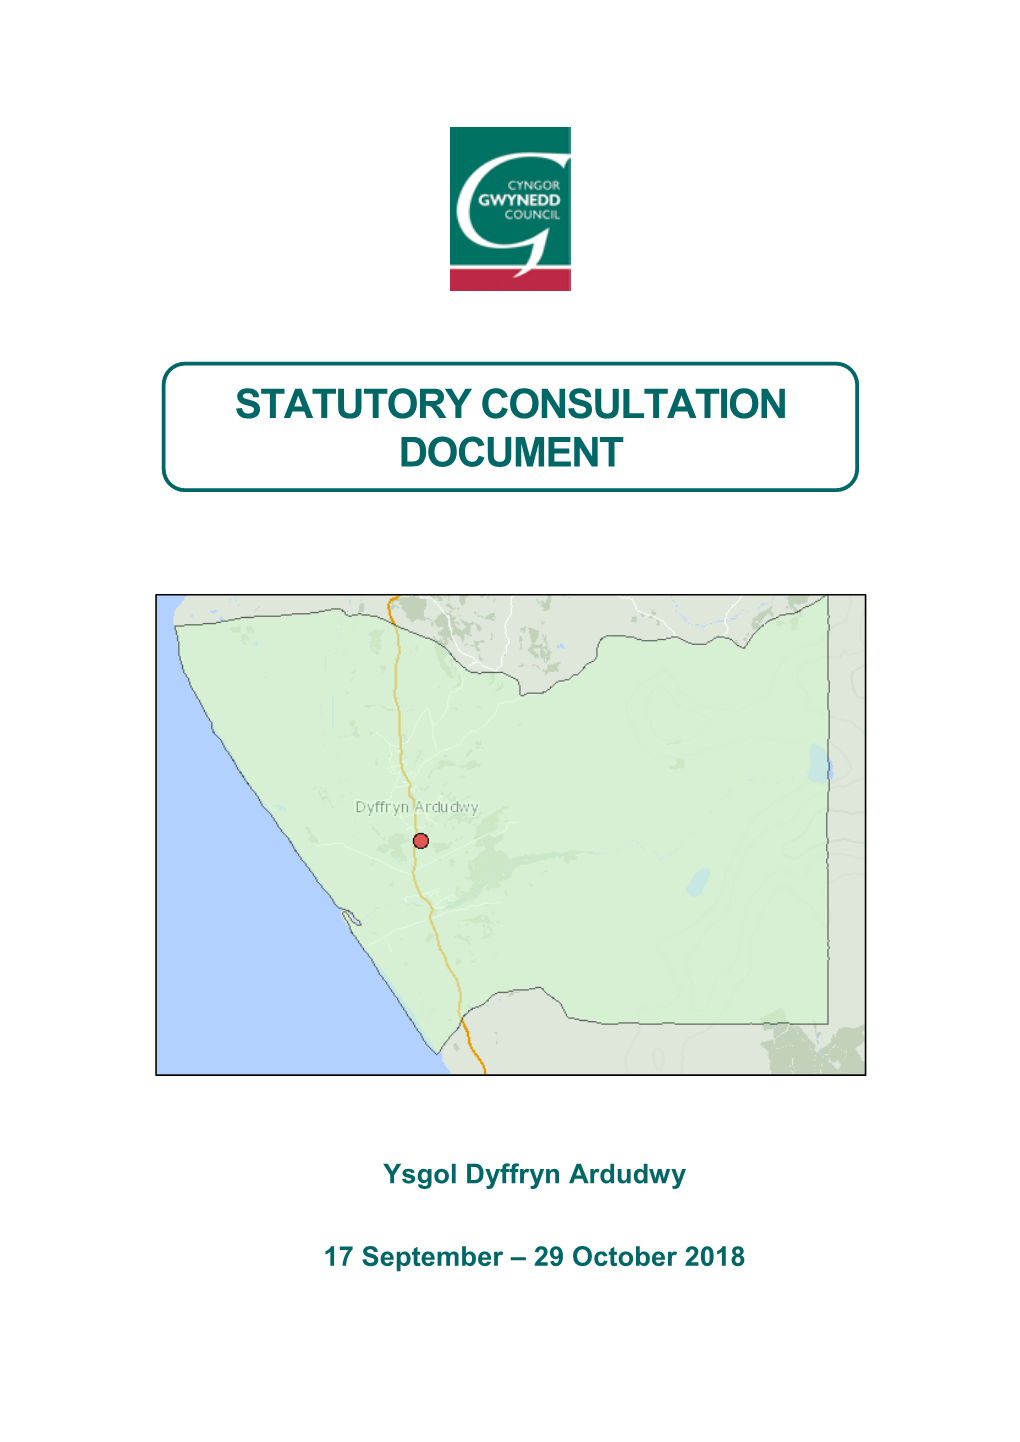 Statutory Consultation Document Should Be Sent to the Modernising Education Office by 13:00 P.M